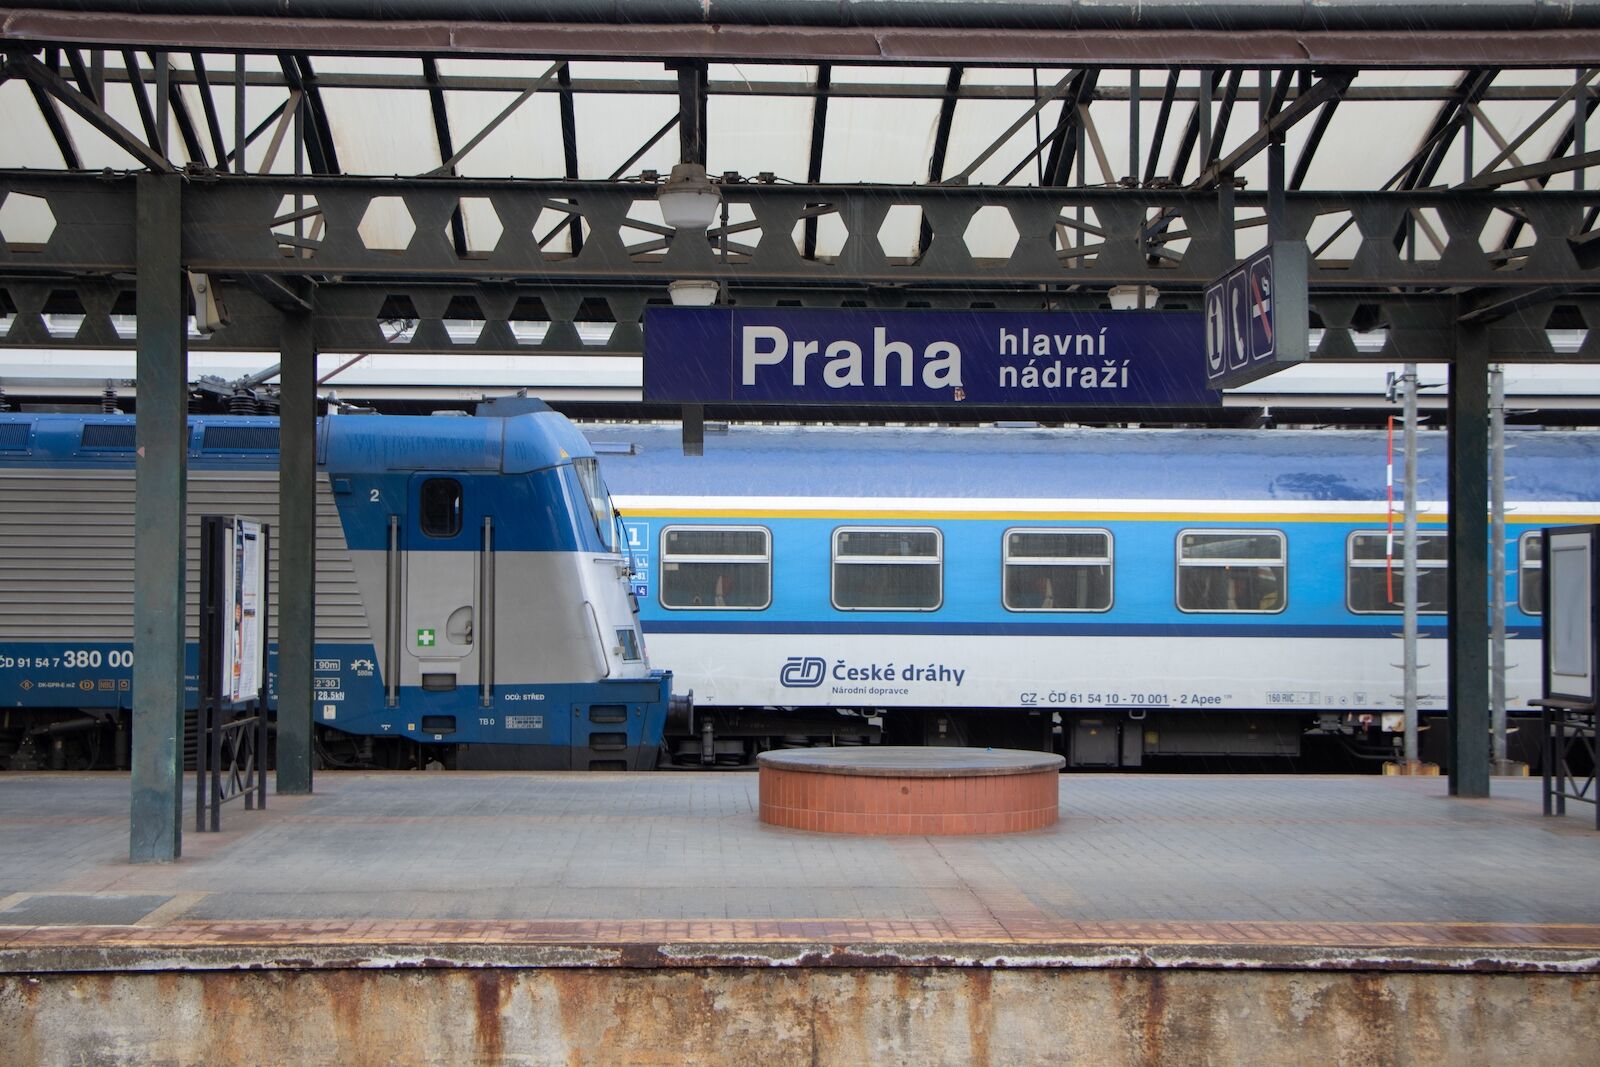 Trains stopped in the main train station in Prague where the Berlin to Prague train stops